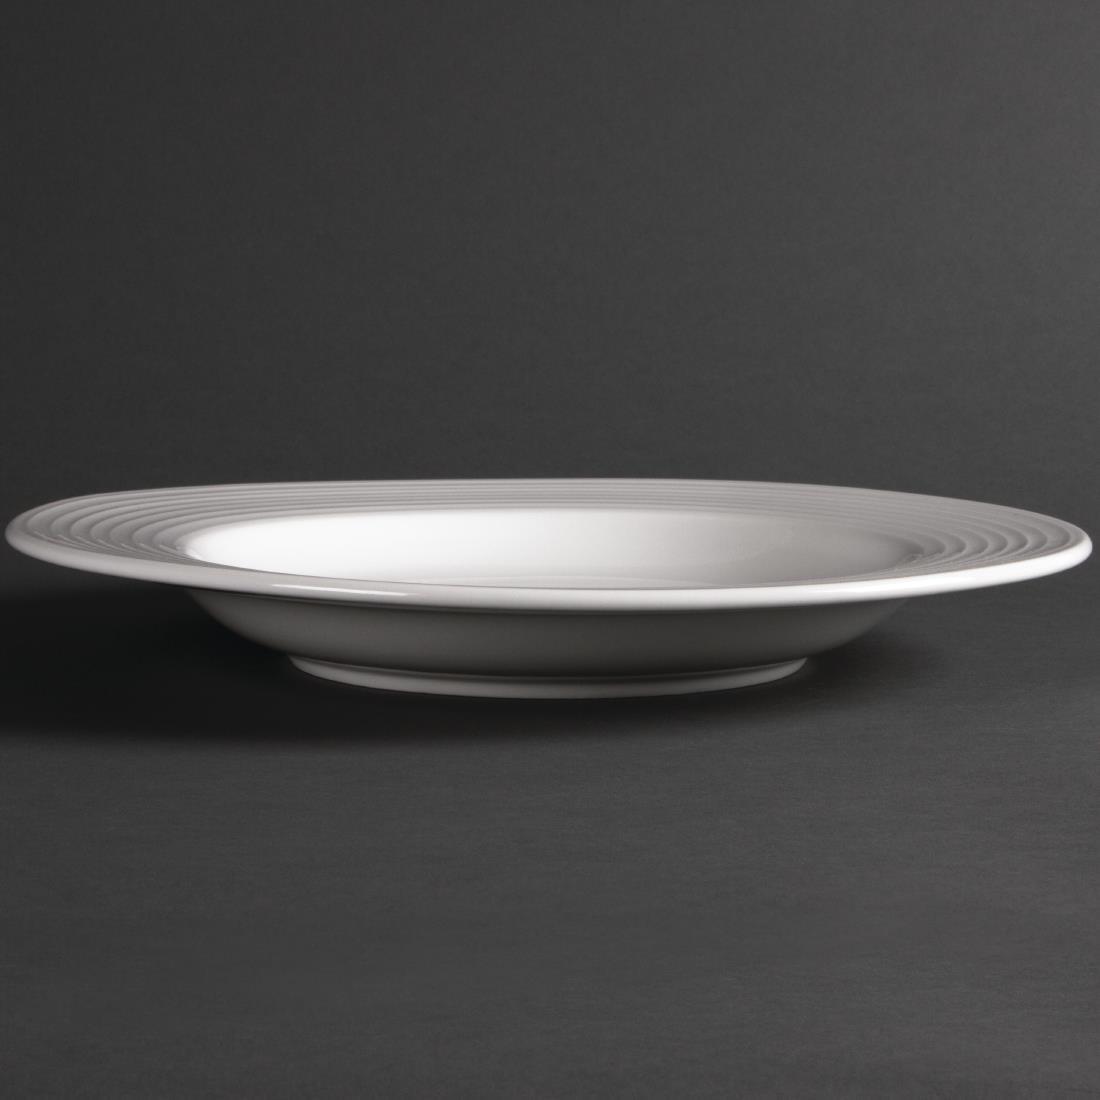 Olympia Linear Pasta Plates 310mm (Pack of 6) - U096  - 2